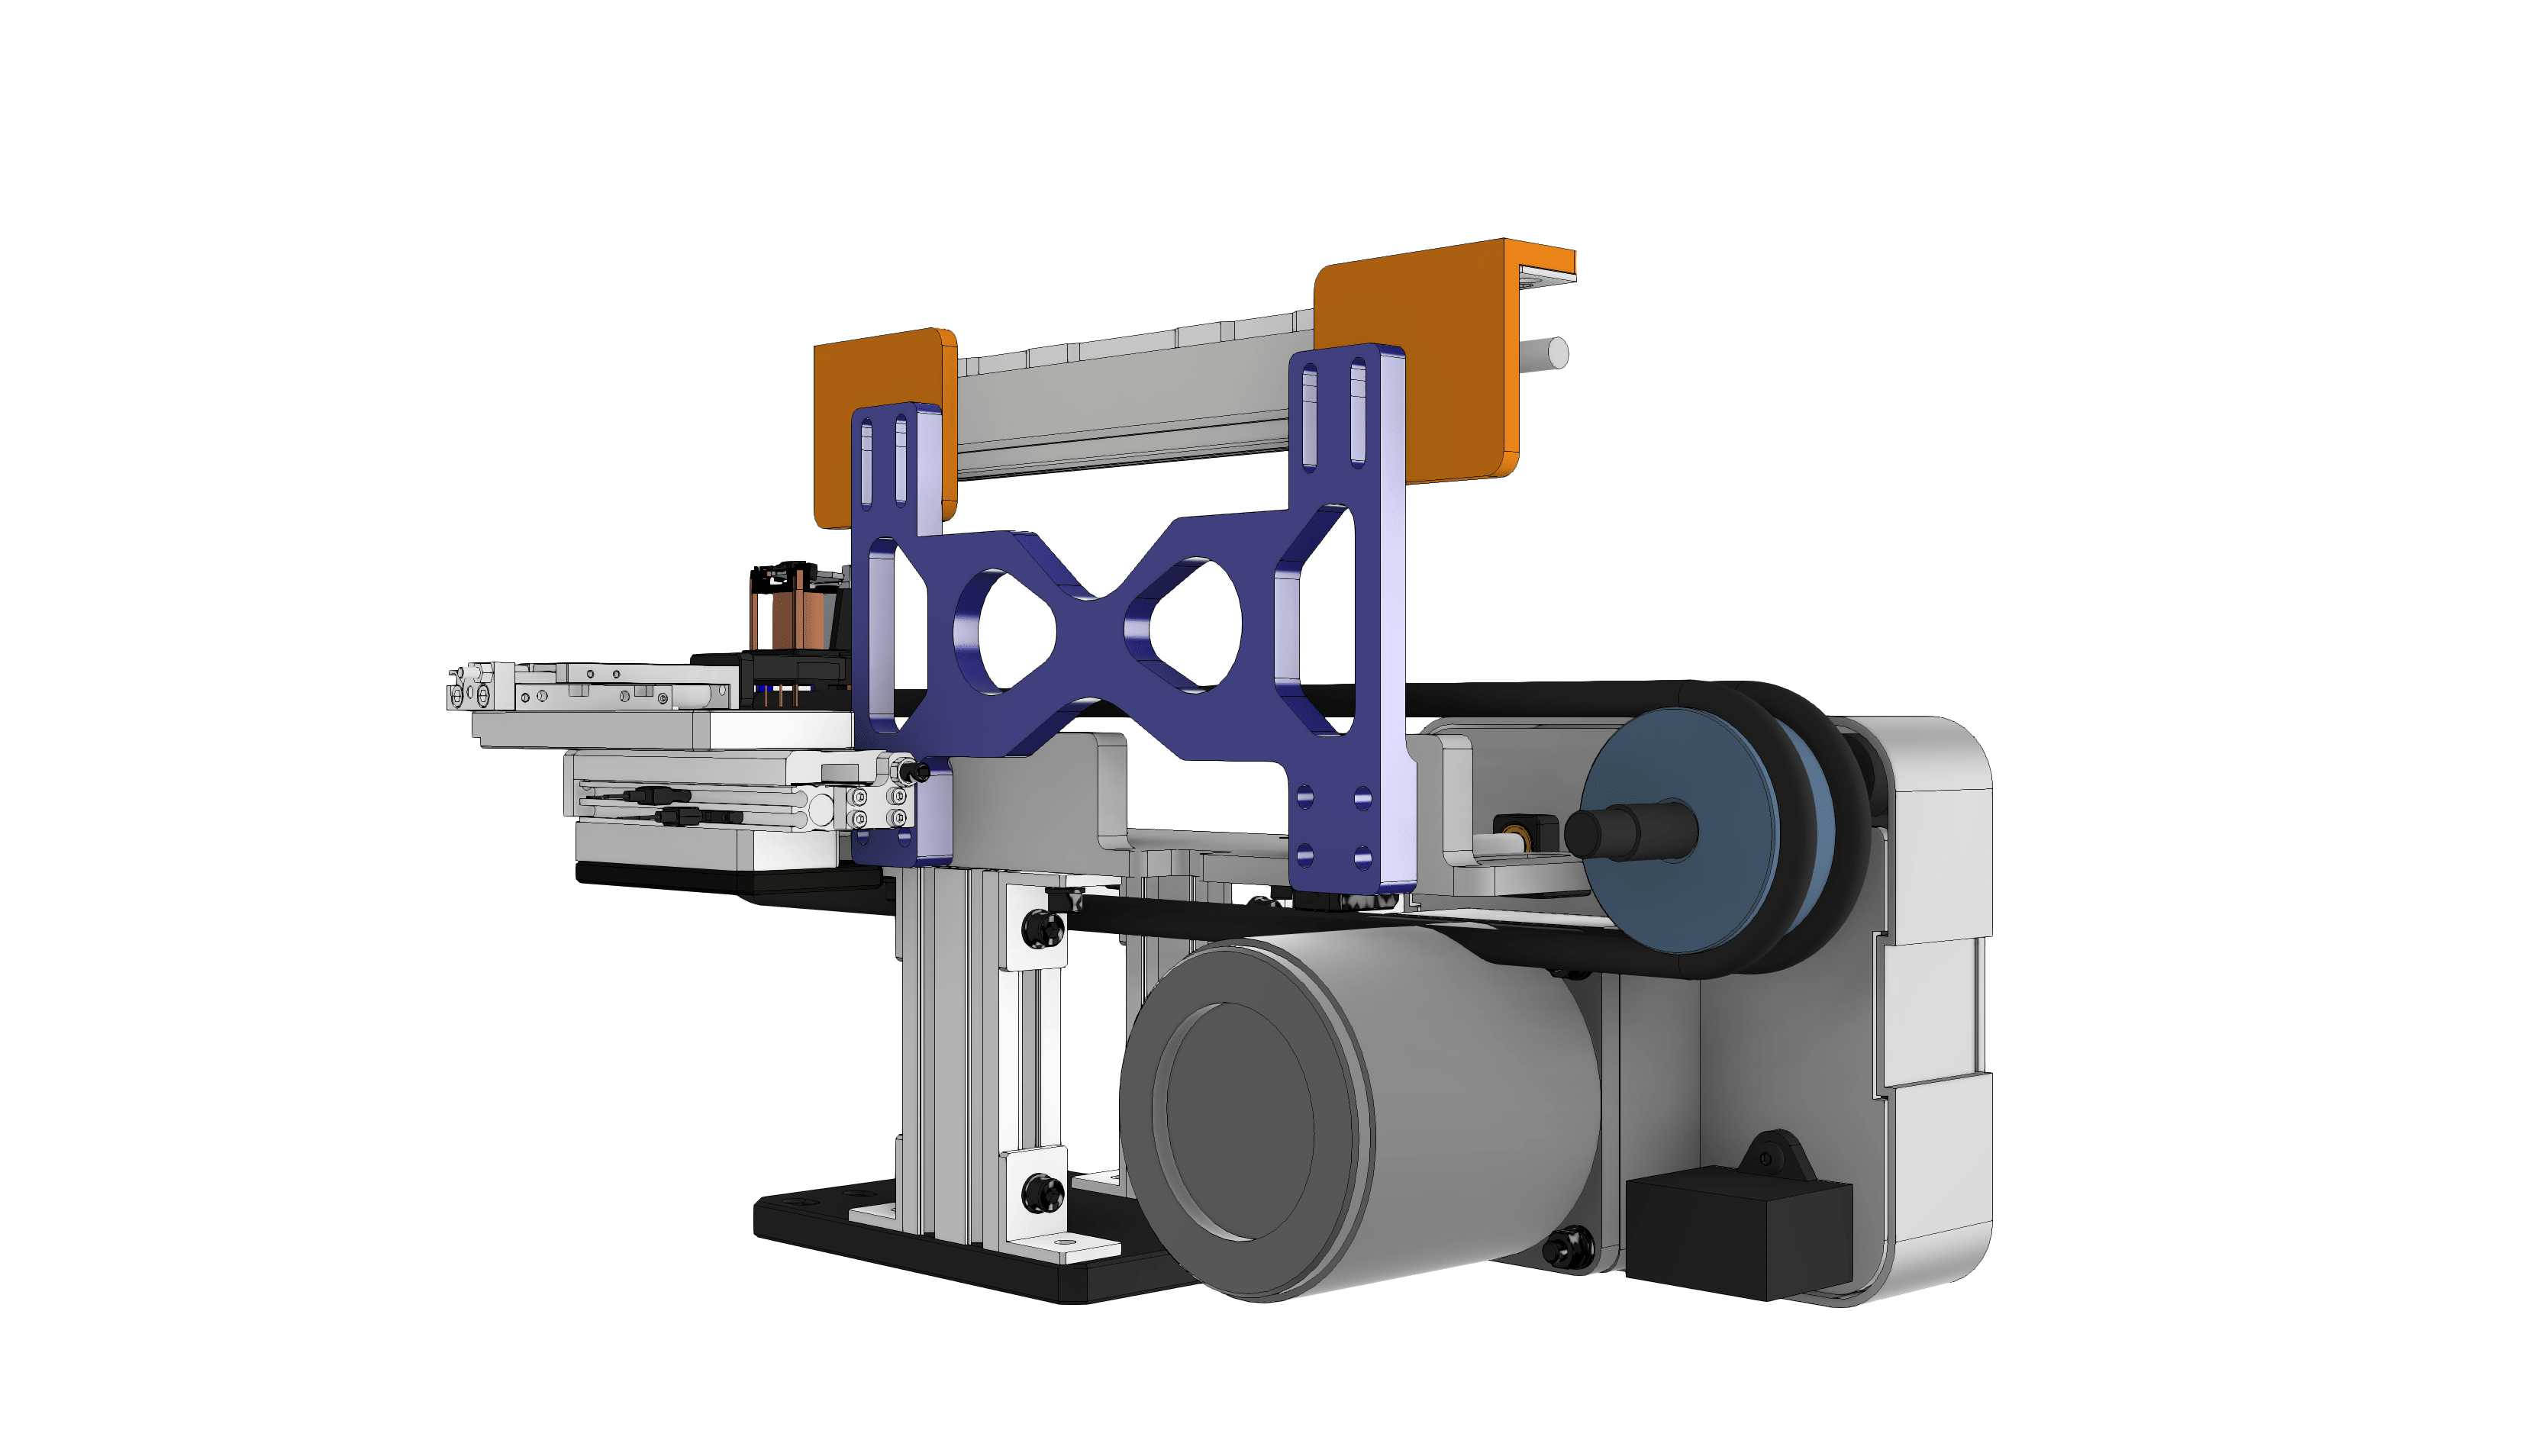 System requirements for Autodesk Inventor LT 2019